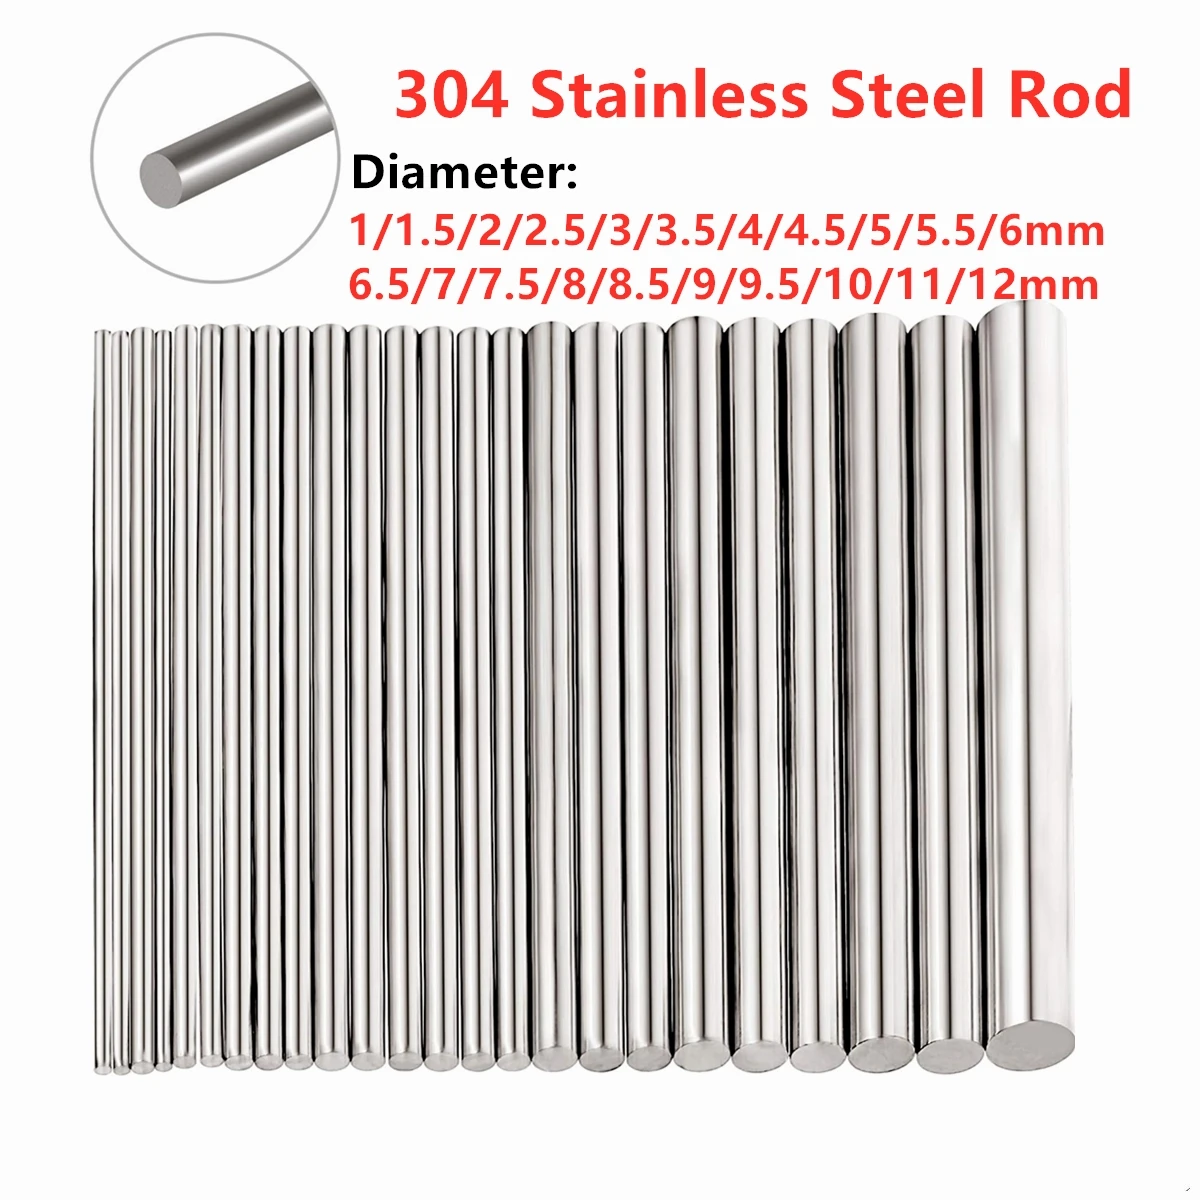 

304 Stainless Steel Model Straight Metal Metric Round Shaft Rod Bars Diameter 1mm~12mm For DIY RC Car RC Helicopter Airplane